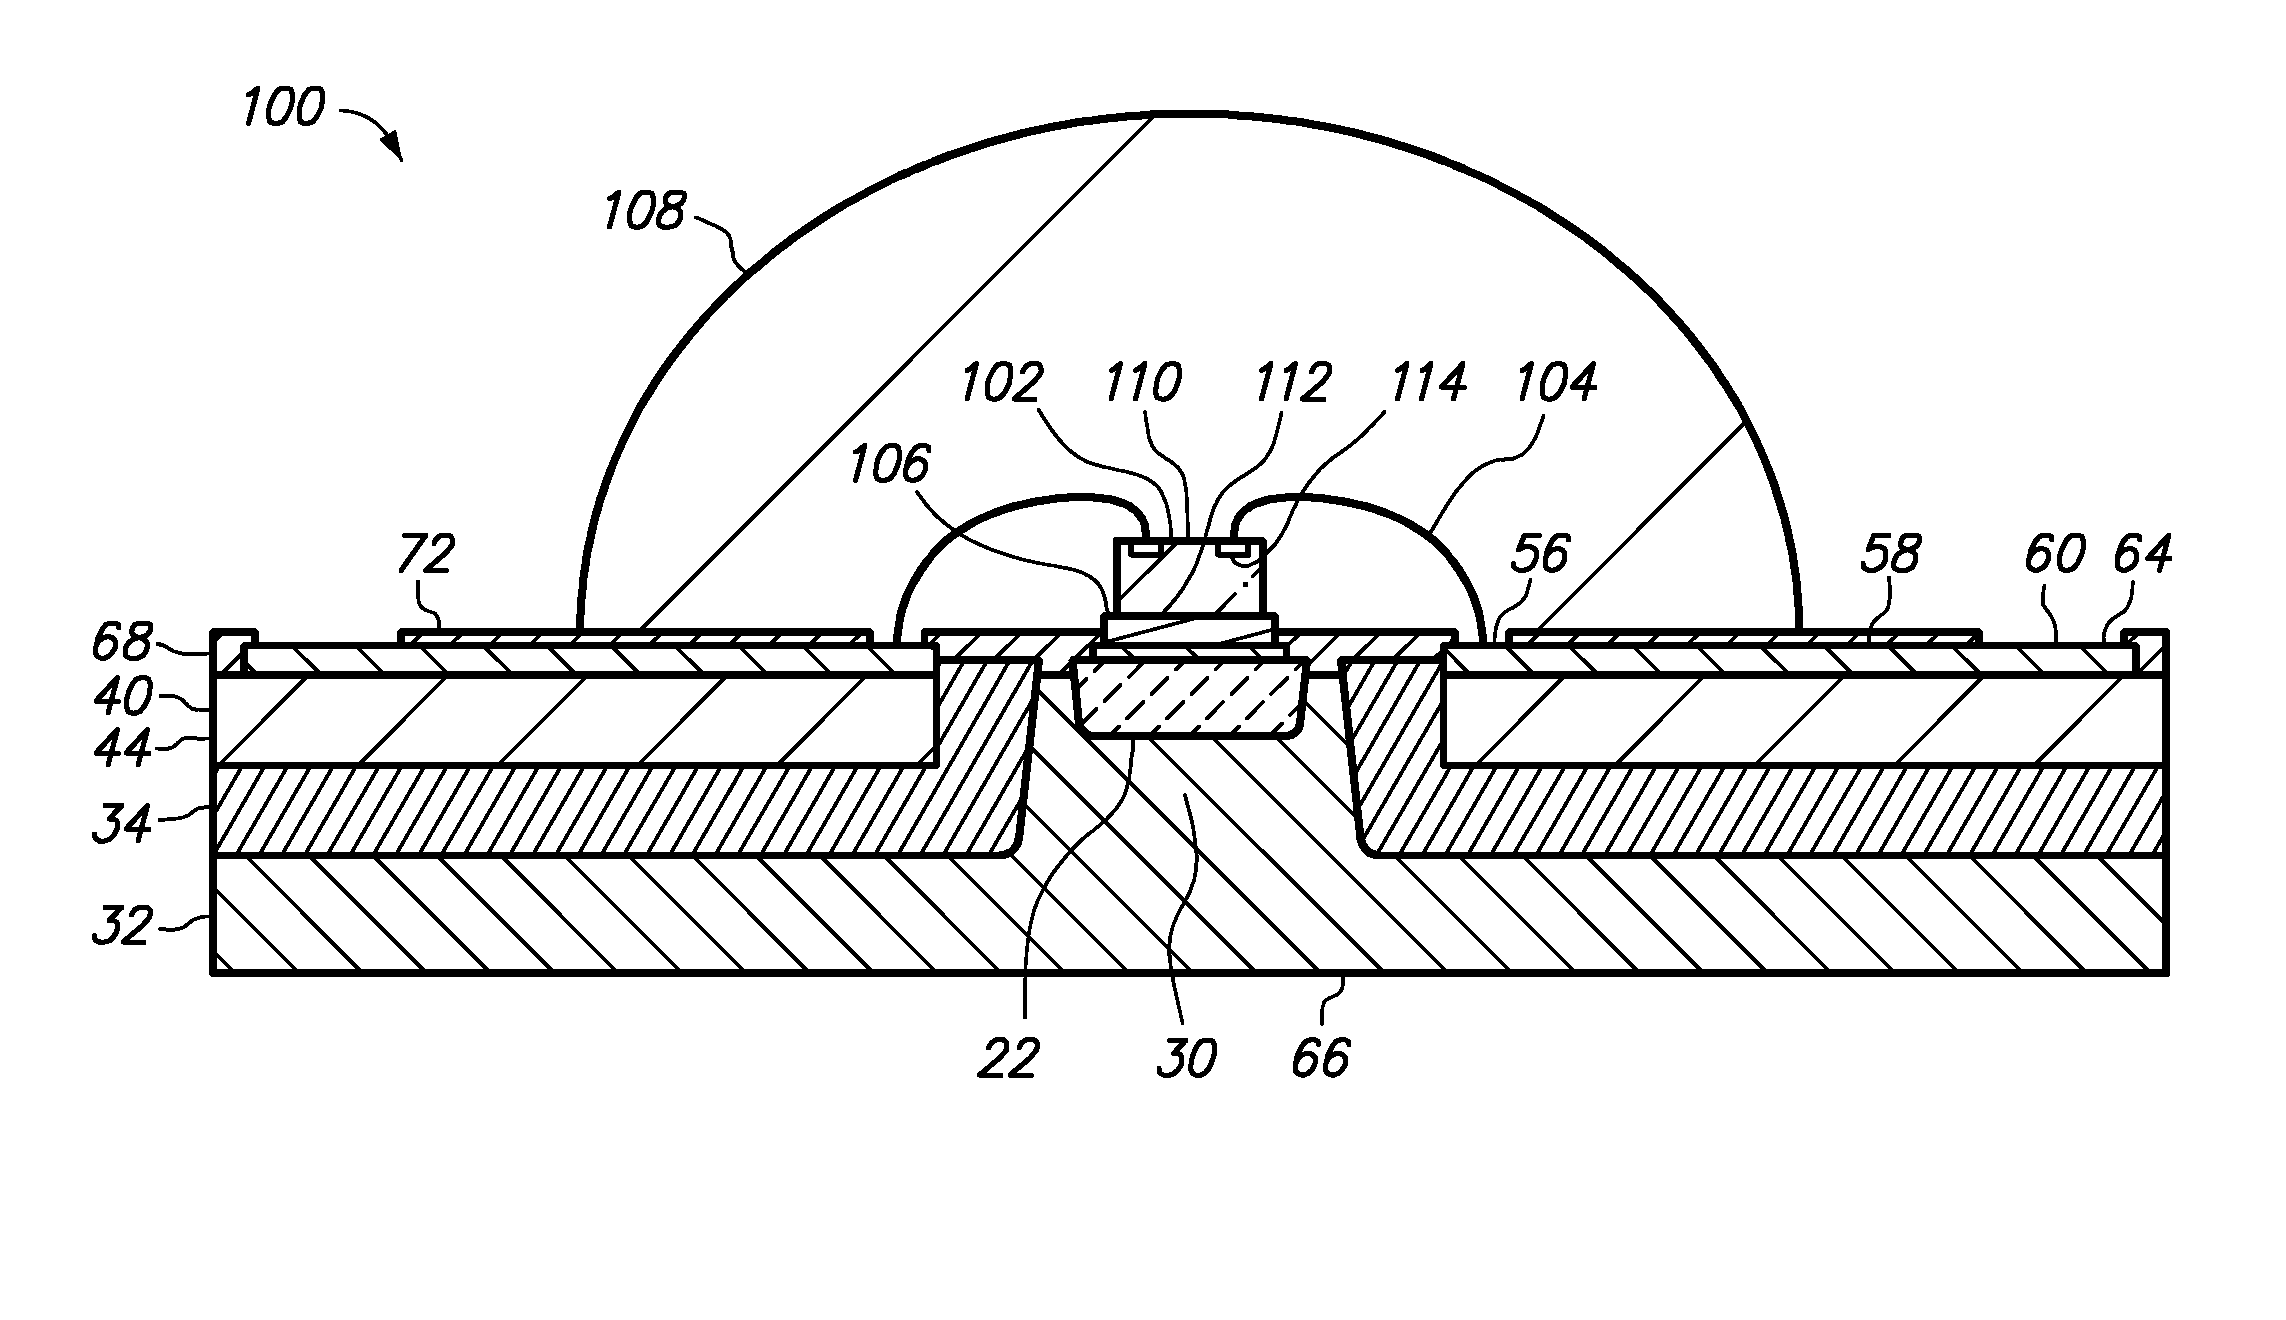 Semiconductor chip assembly with post/base heat spreader and ceramic block in post